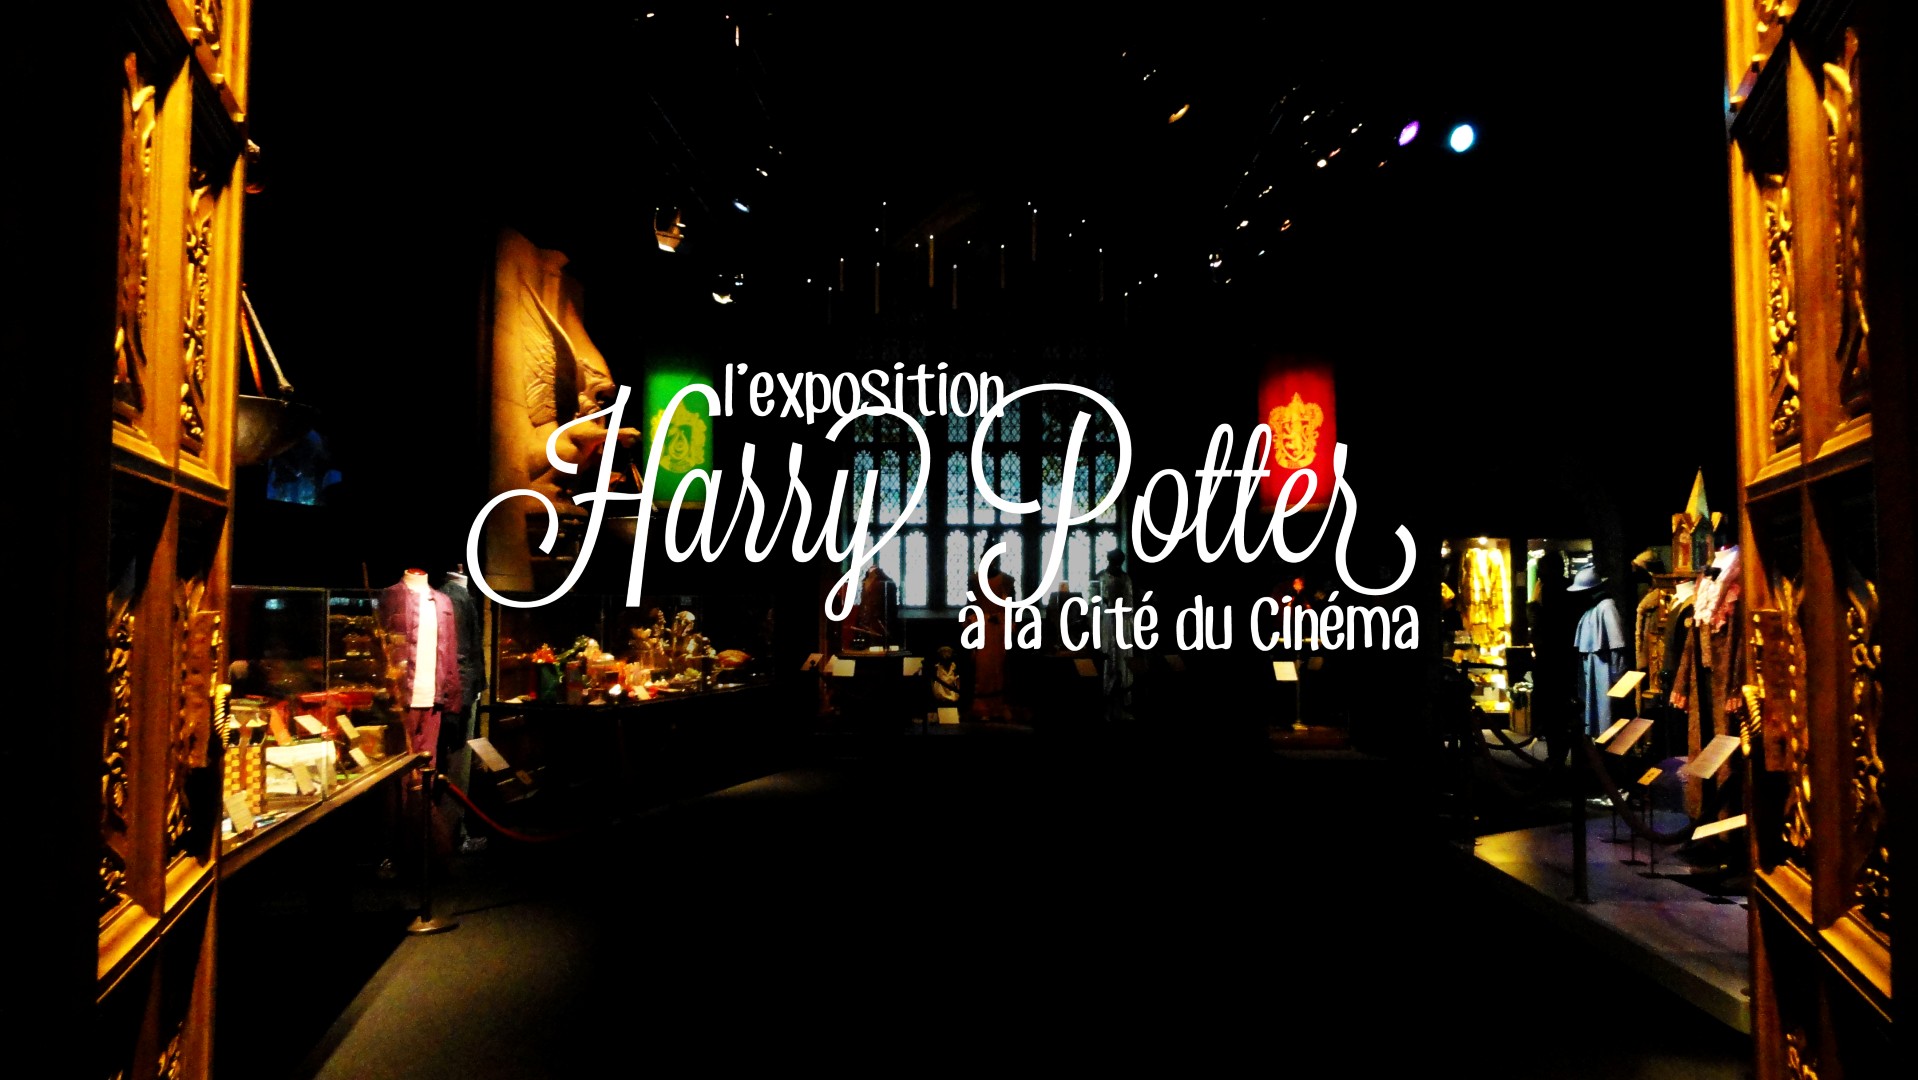 20150430_expo_harry_potter-3 (Large)